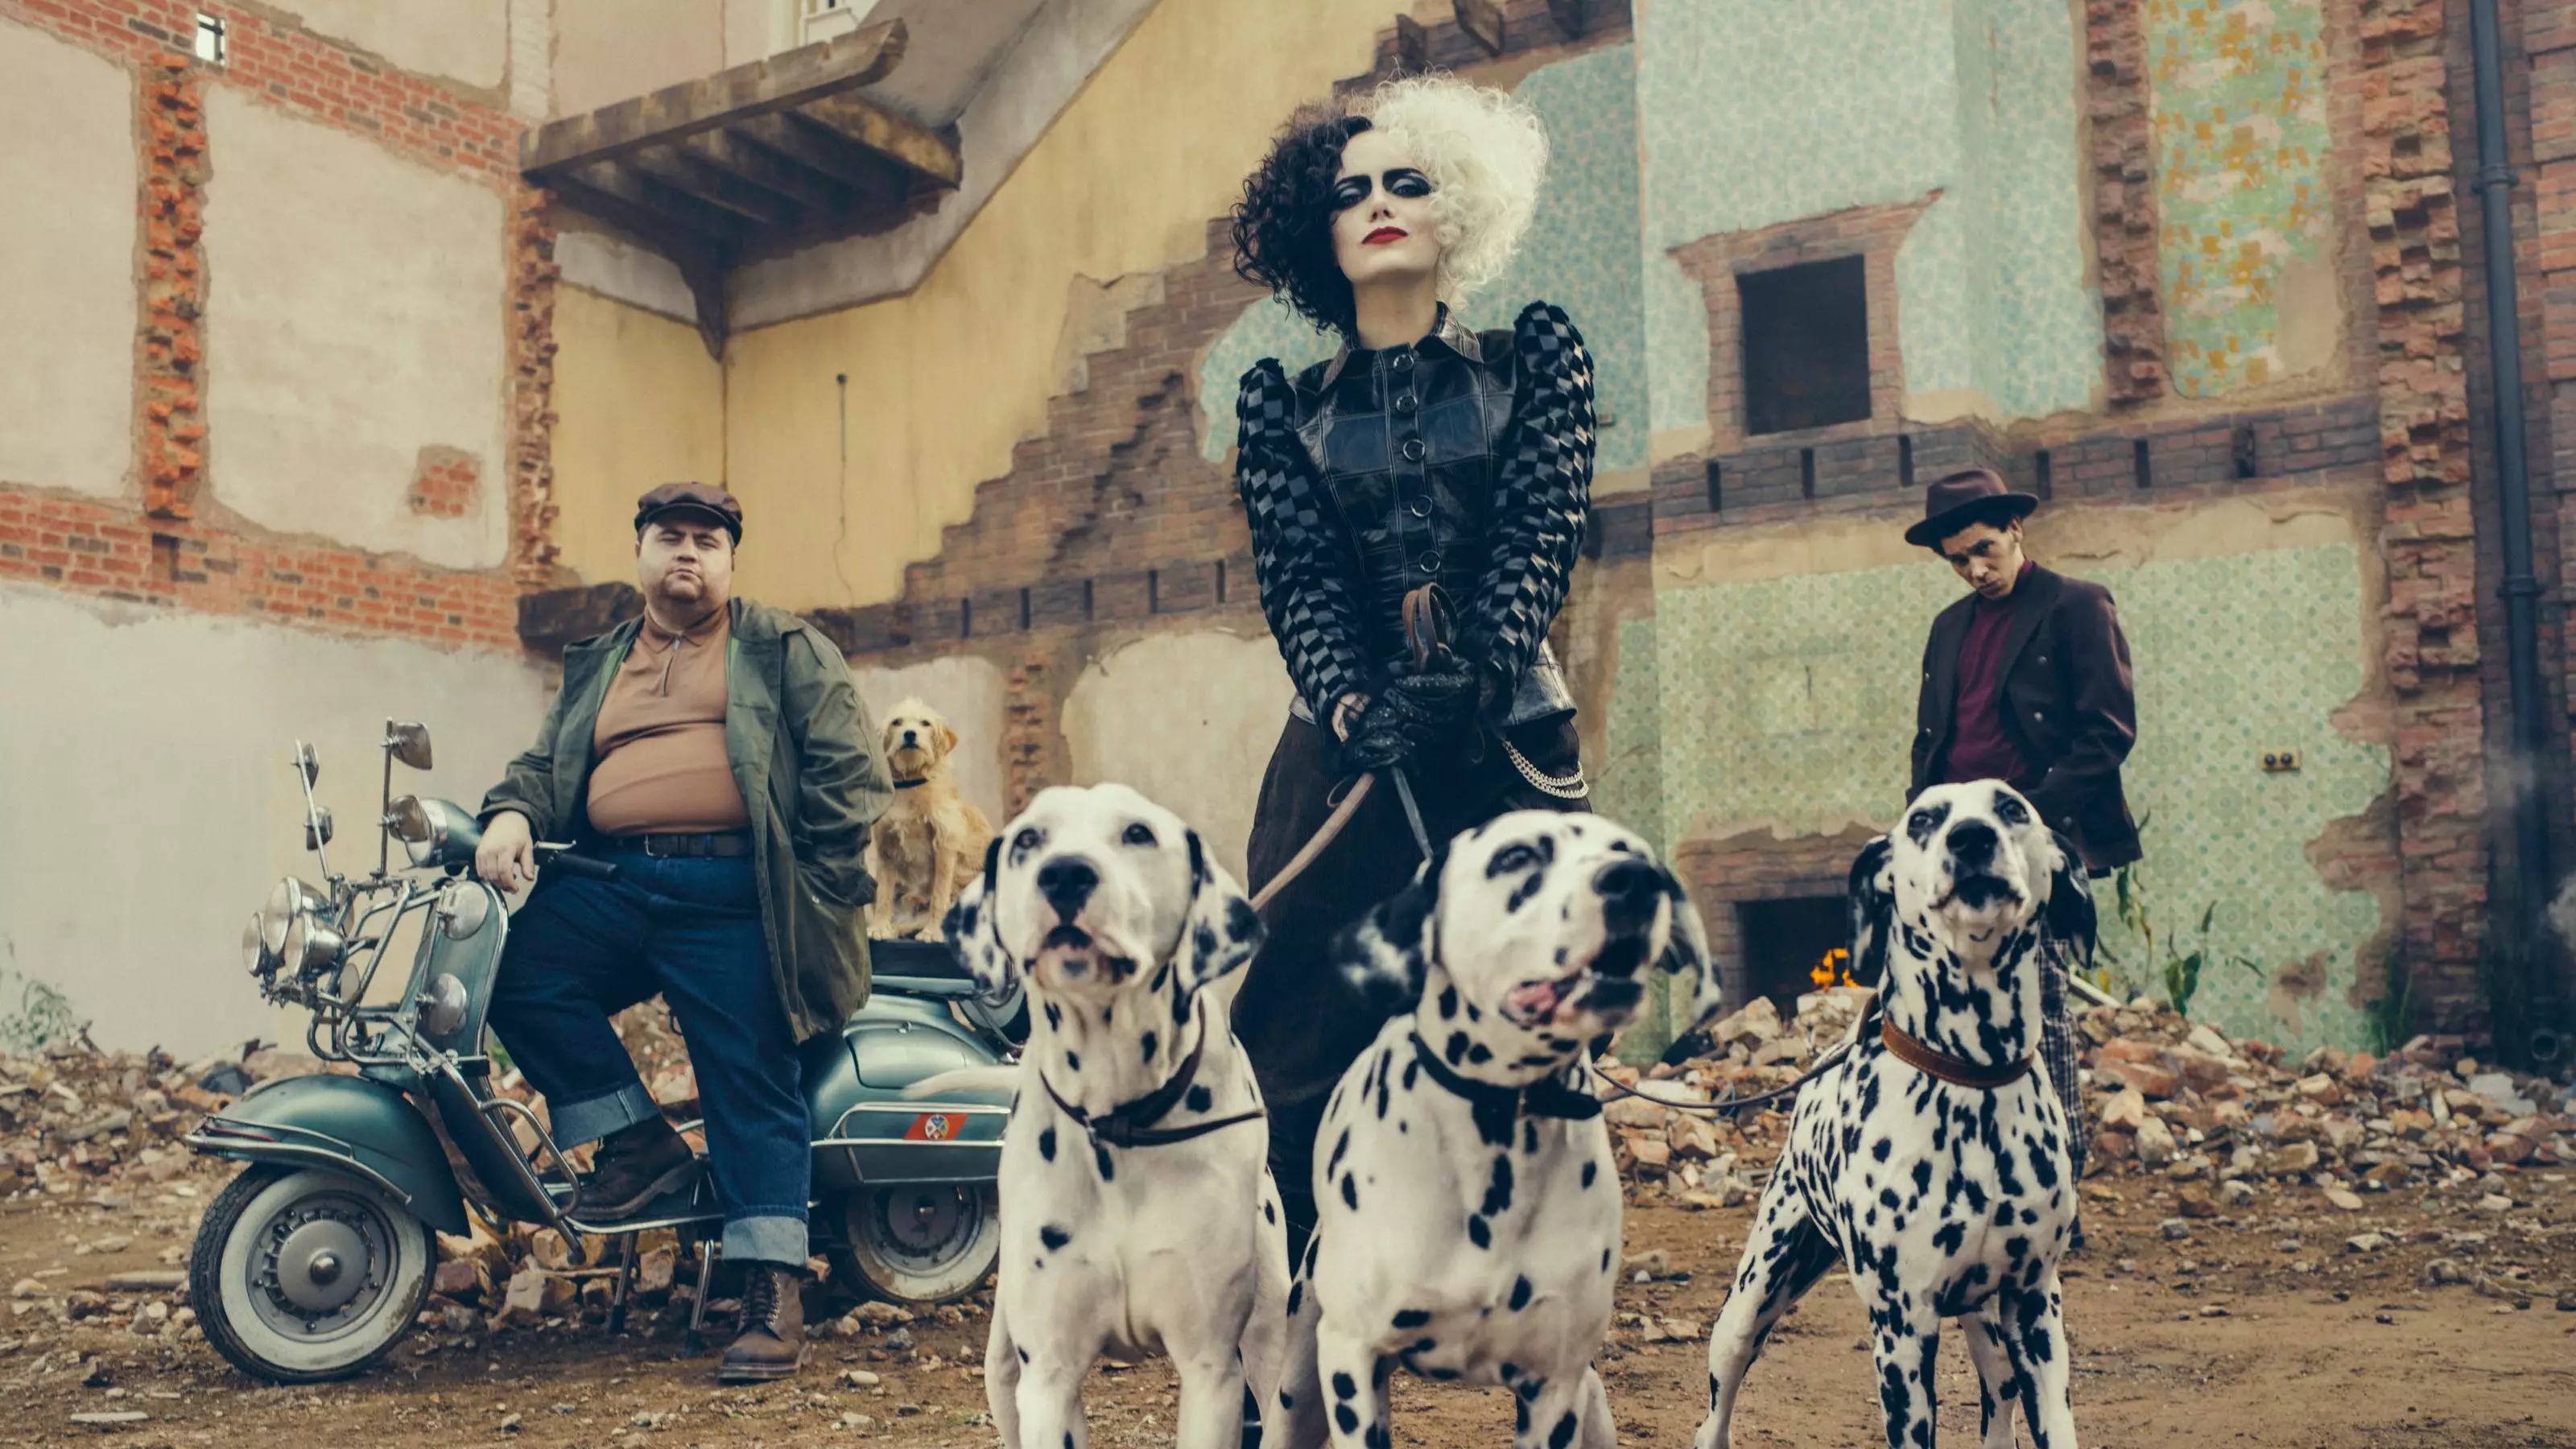 Emma Stone's Cruella Is Offically Coming To Disney Plus